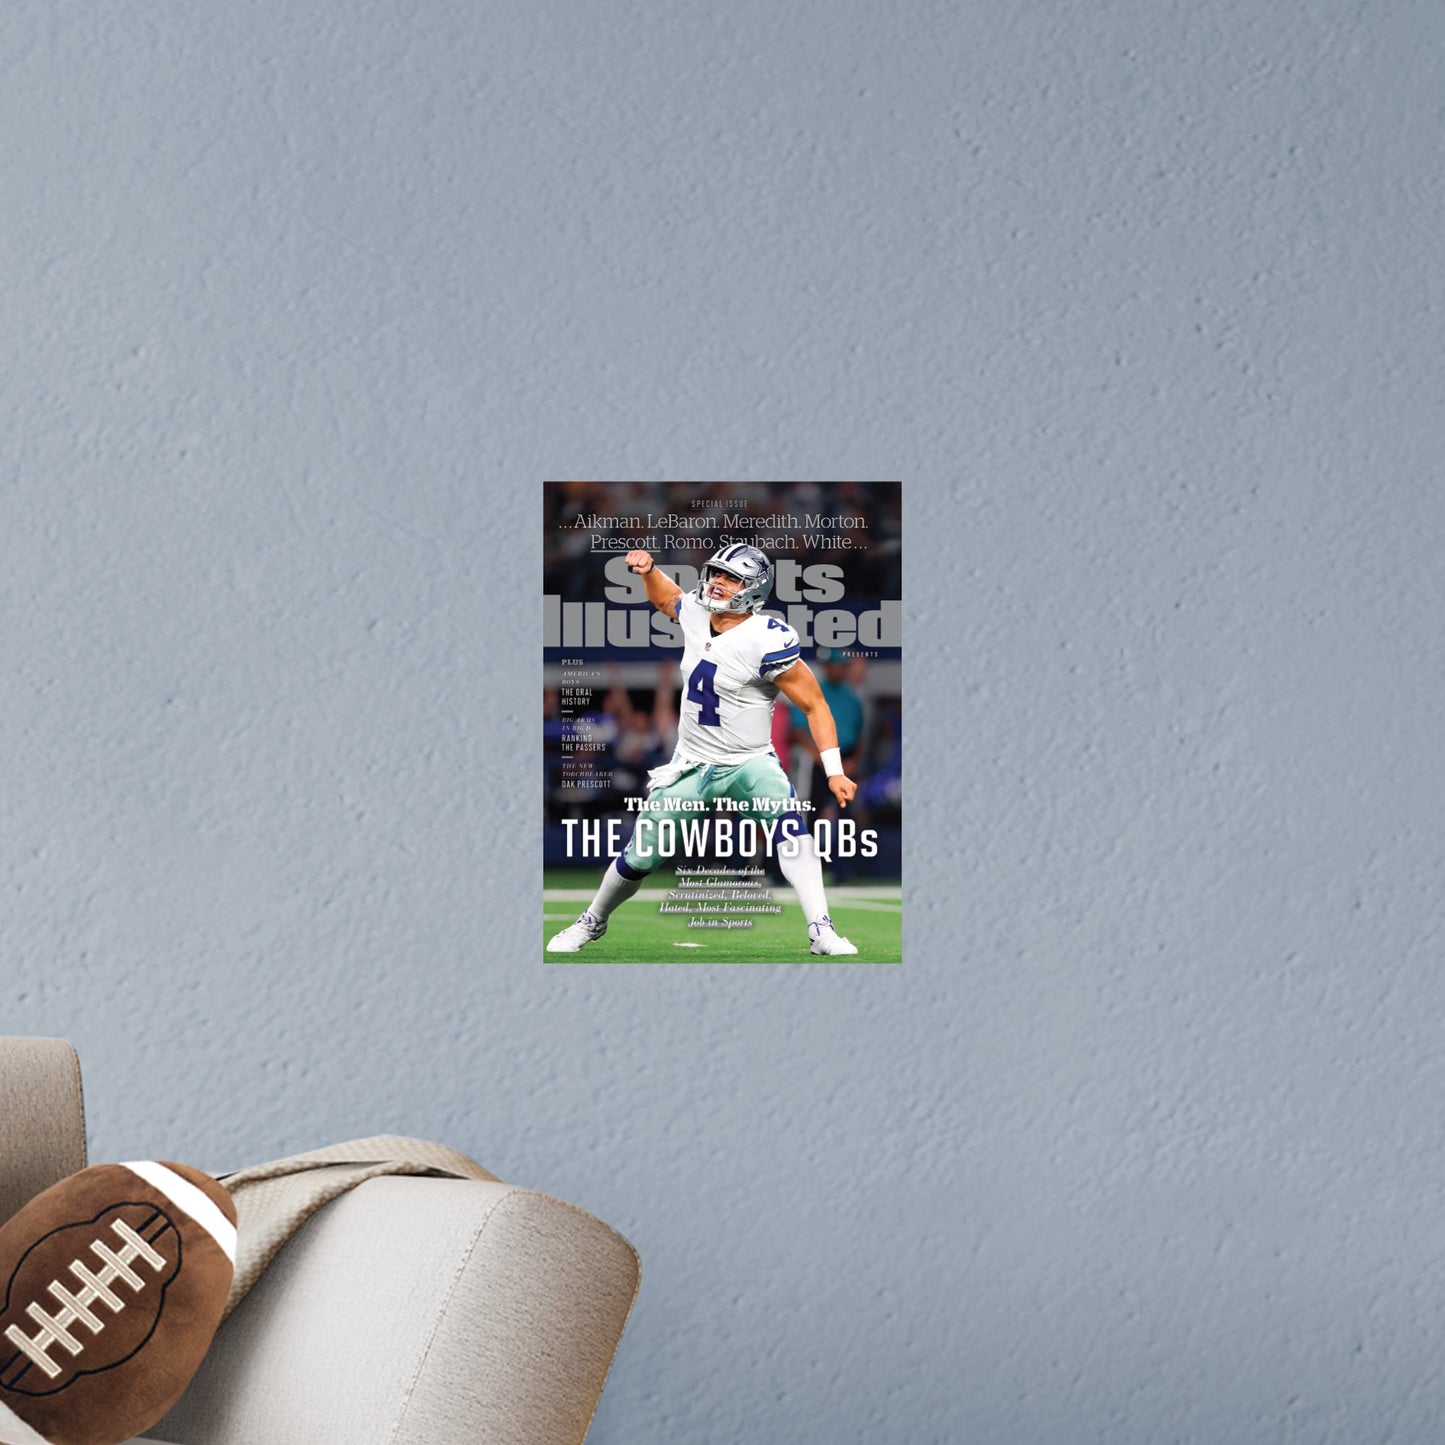 Dallas Cowboys: Dak Prescott August 2017 Sports Illustrated Cover - Officially Licensed NFL Removable Adhesive Decal